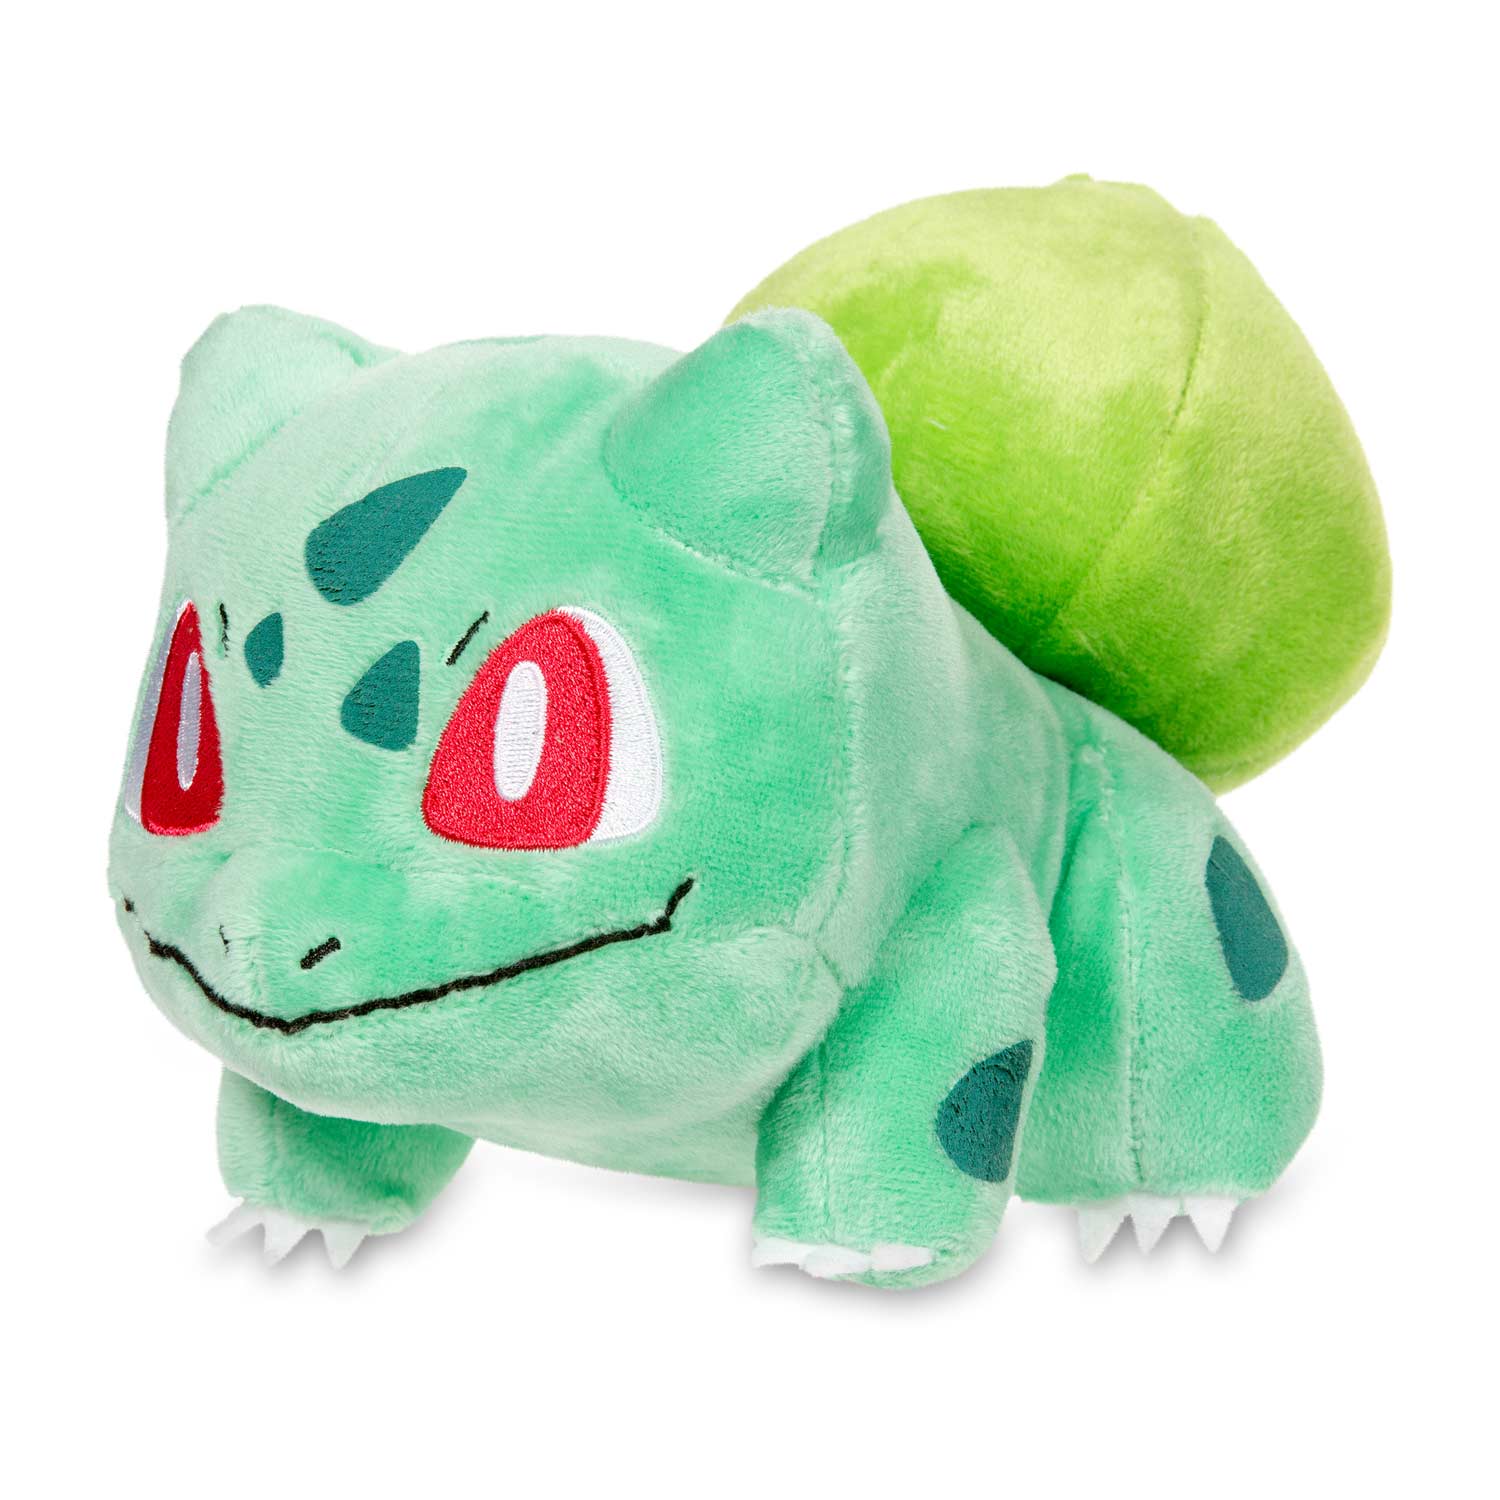 What Pokémon would you keep a plush of on your desk?